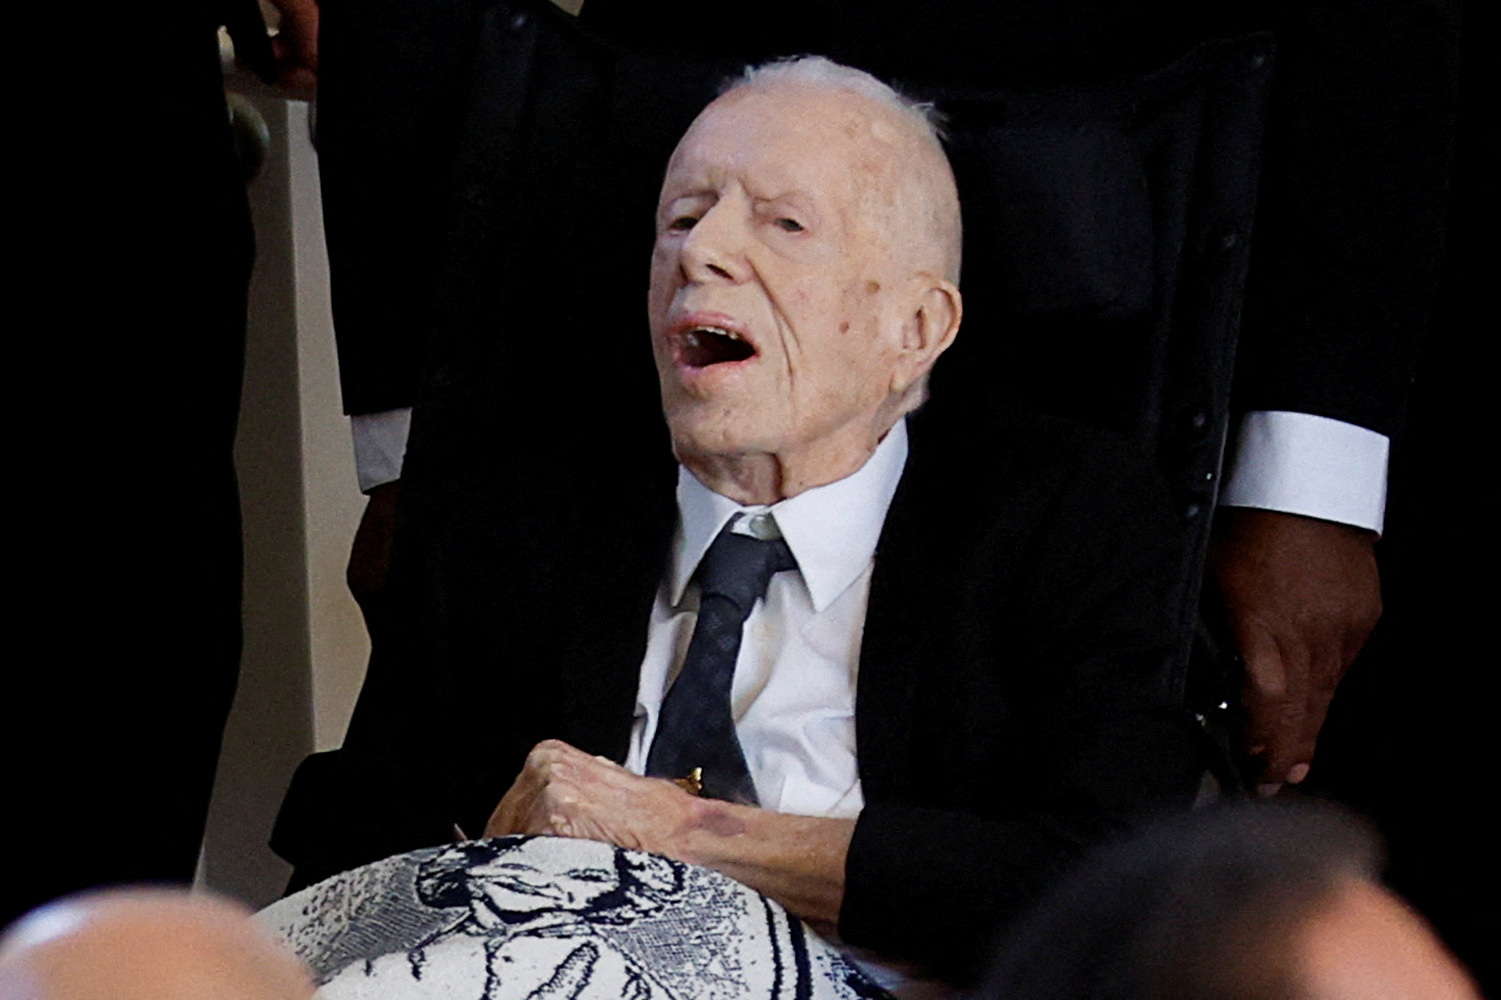 Jimmy Carter makes rare public appearance at his wife’s memorial